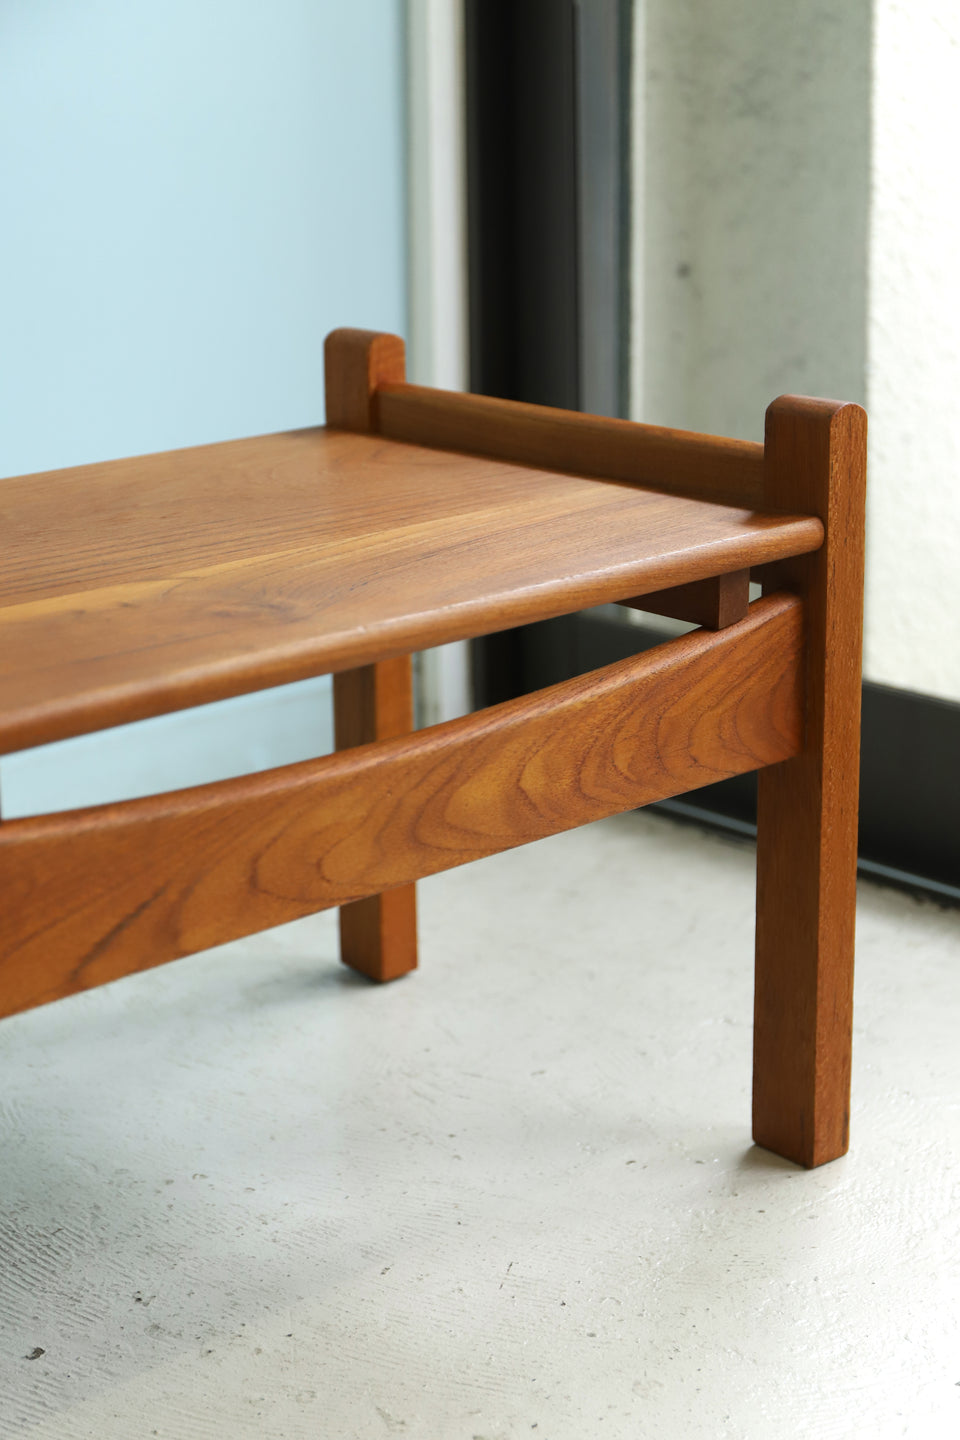 Danish Vintage Side Low Table/デンマークヴィンテージ サイドローテーブル チーク材 北欧家具